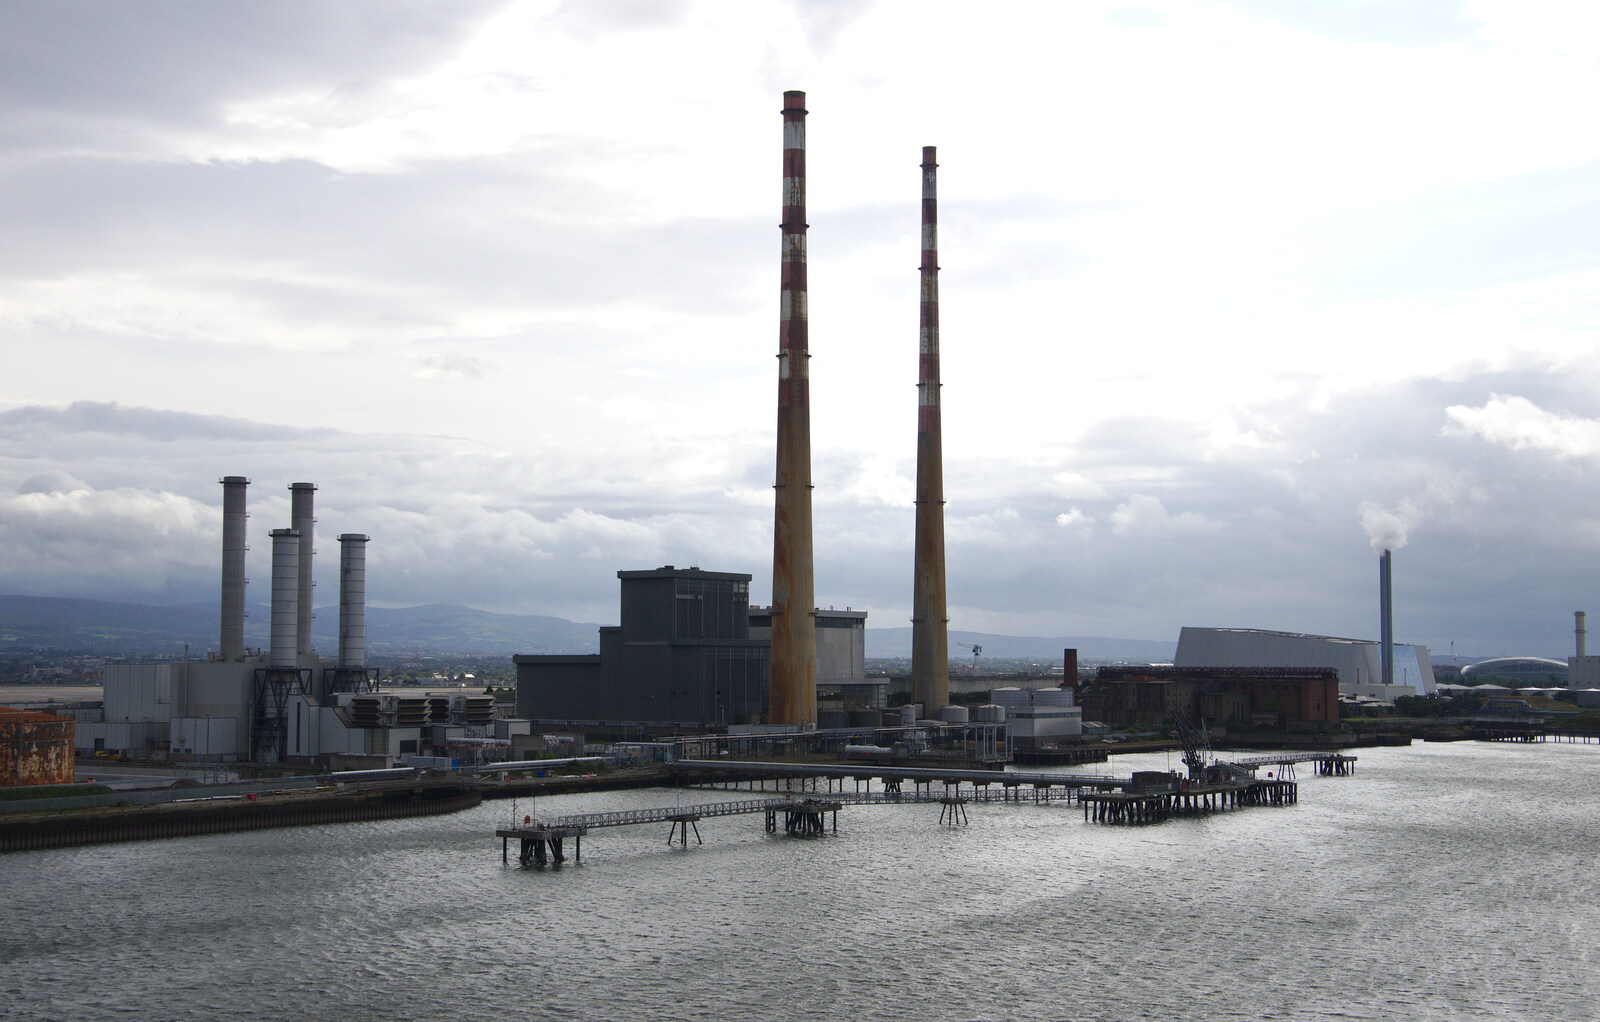 The Winkies and the Poolbeg generating station from The Summer Trip to Ireland, Monkstown, Co. Dublin, Ireland - 9th August 2019